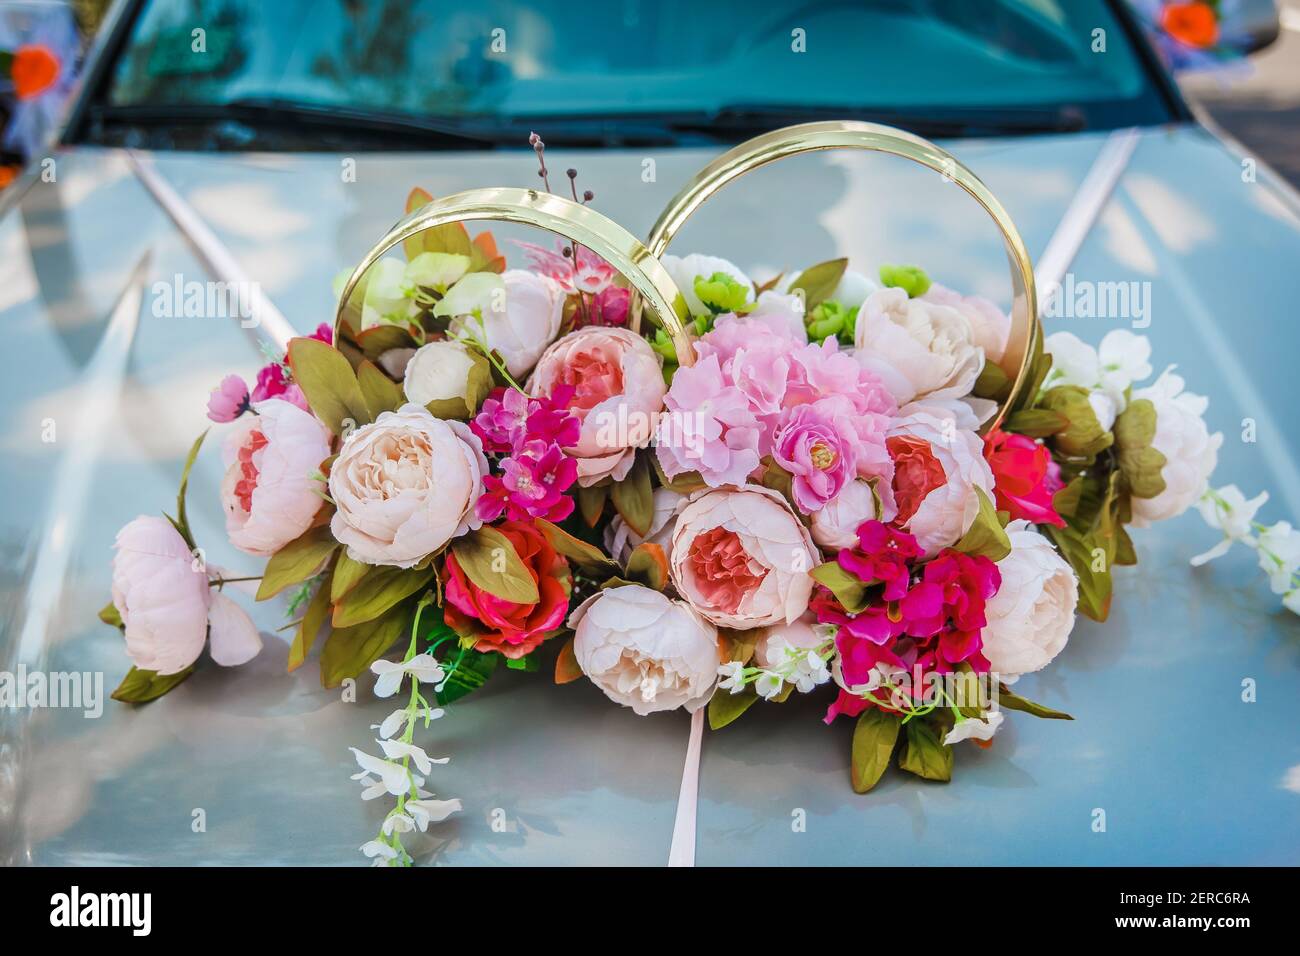 Decoration of artificial flowers of roses and wedding rings on the hood of the car close-up. Stock Photo